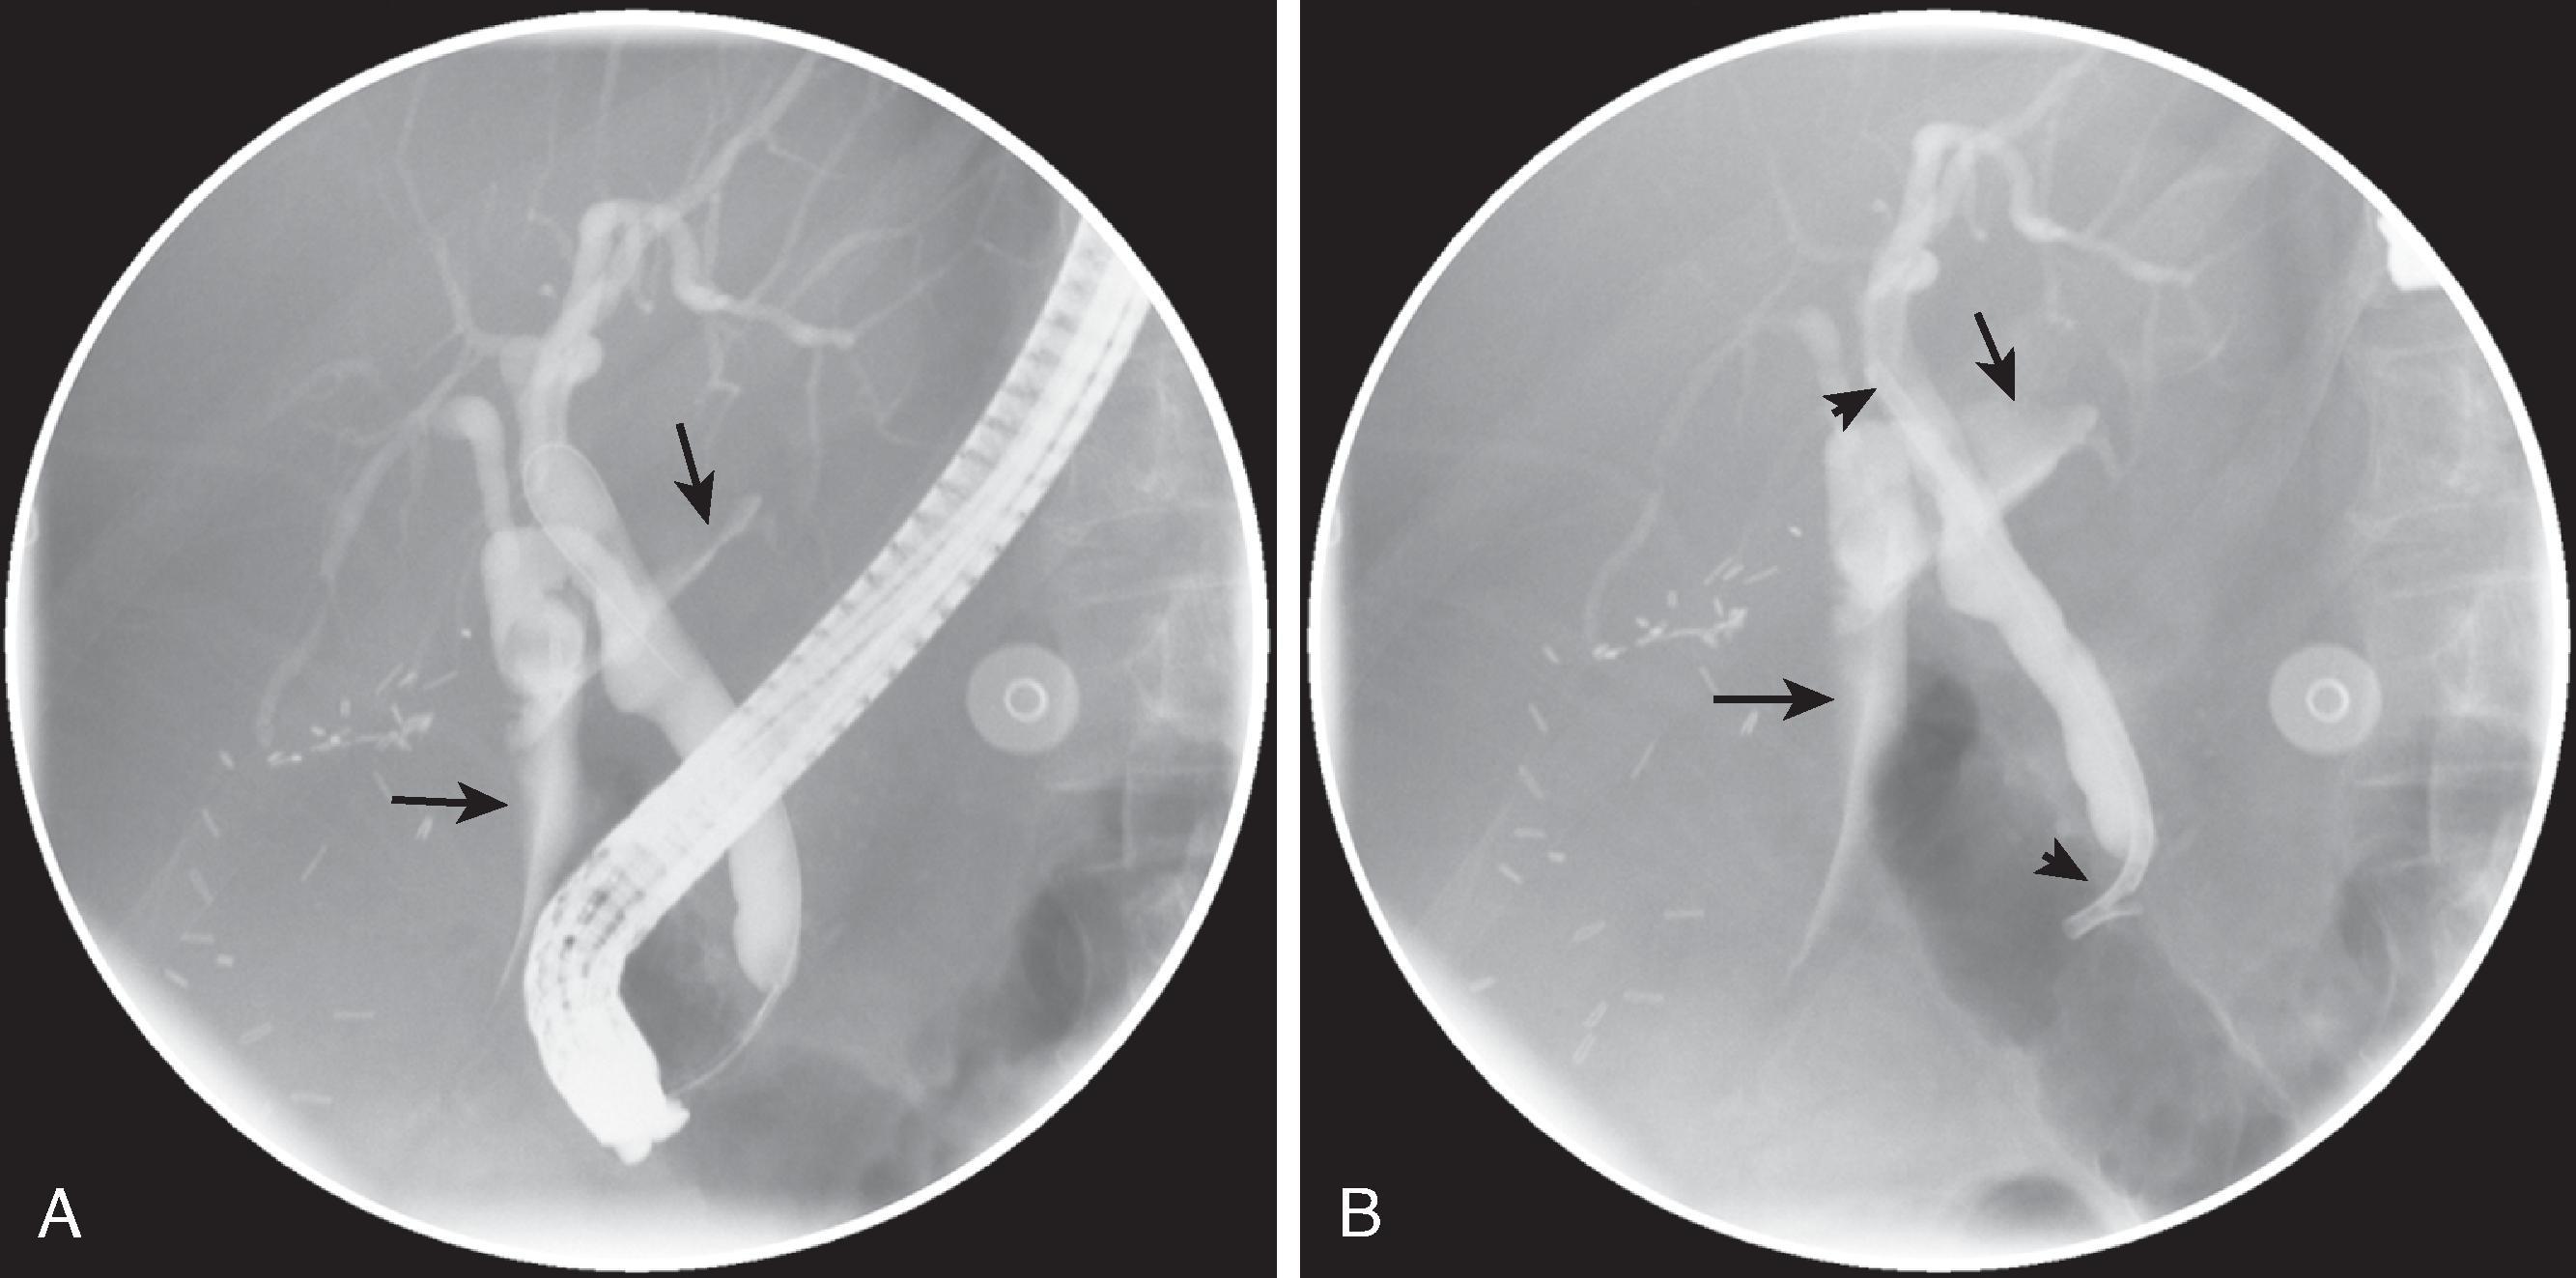 Fig. 52.3, Bile leak after cholecystectomy. (A and B) Endoscopic retrograde cholangiopancreatography (ERCP) 10 days after cholecystectomy (for gallbladder cancer) shows active extravasation of contrast material (arrows) . This was considered a “minor” leak and treated with ERCP-guided stent placement (arrowheads, B) .